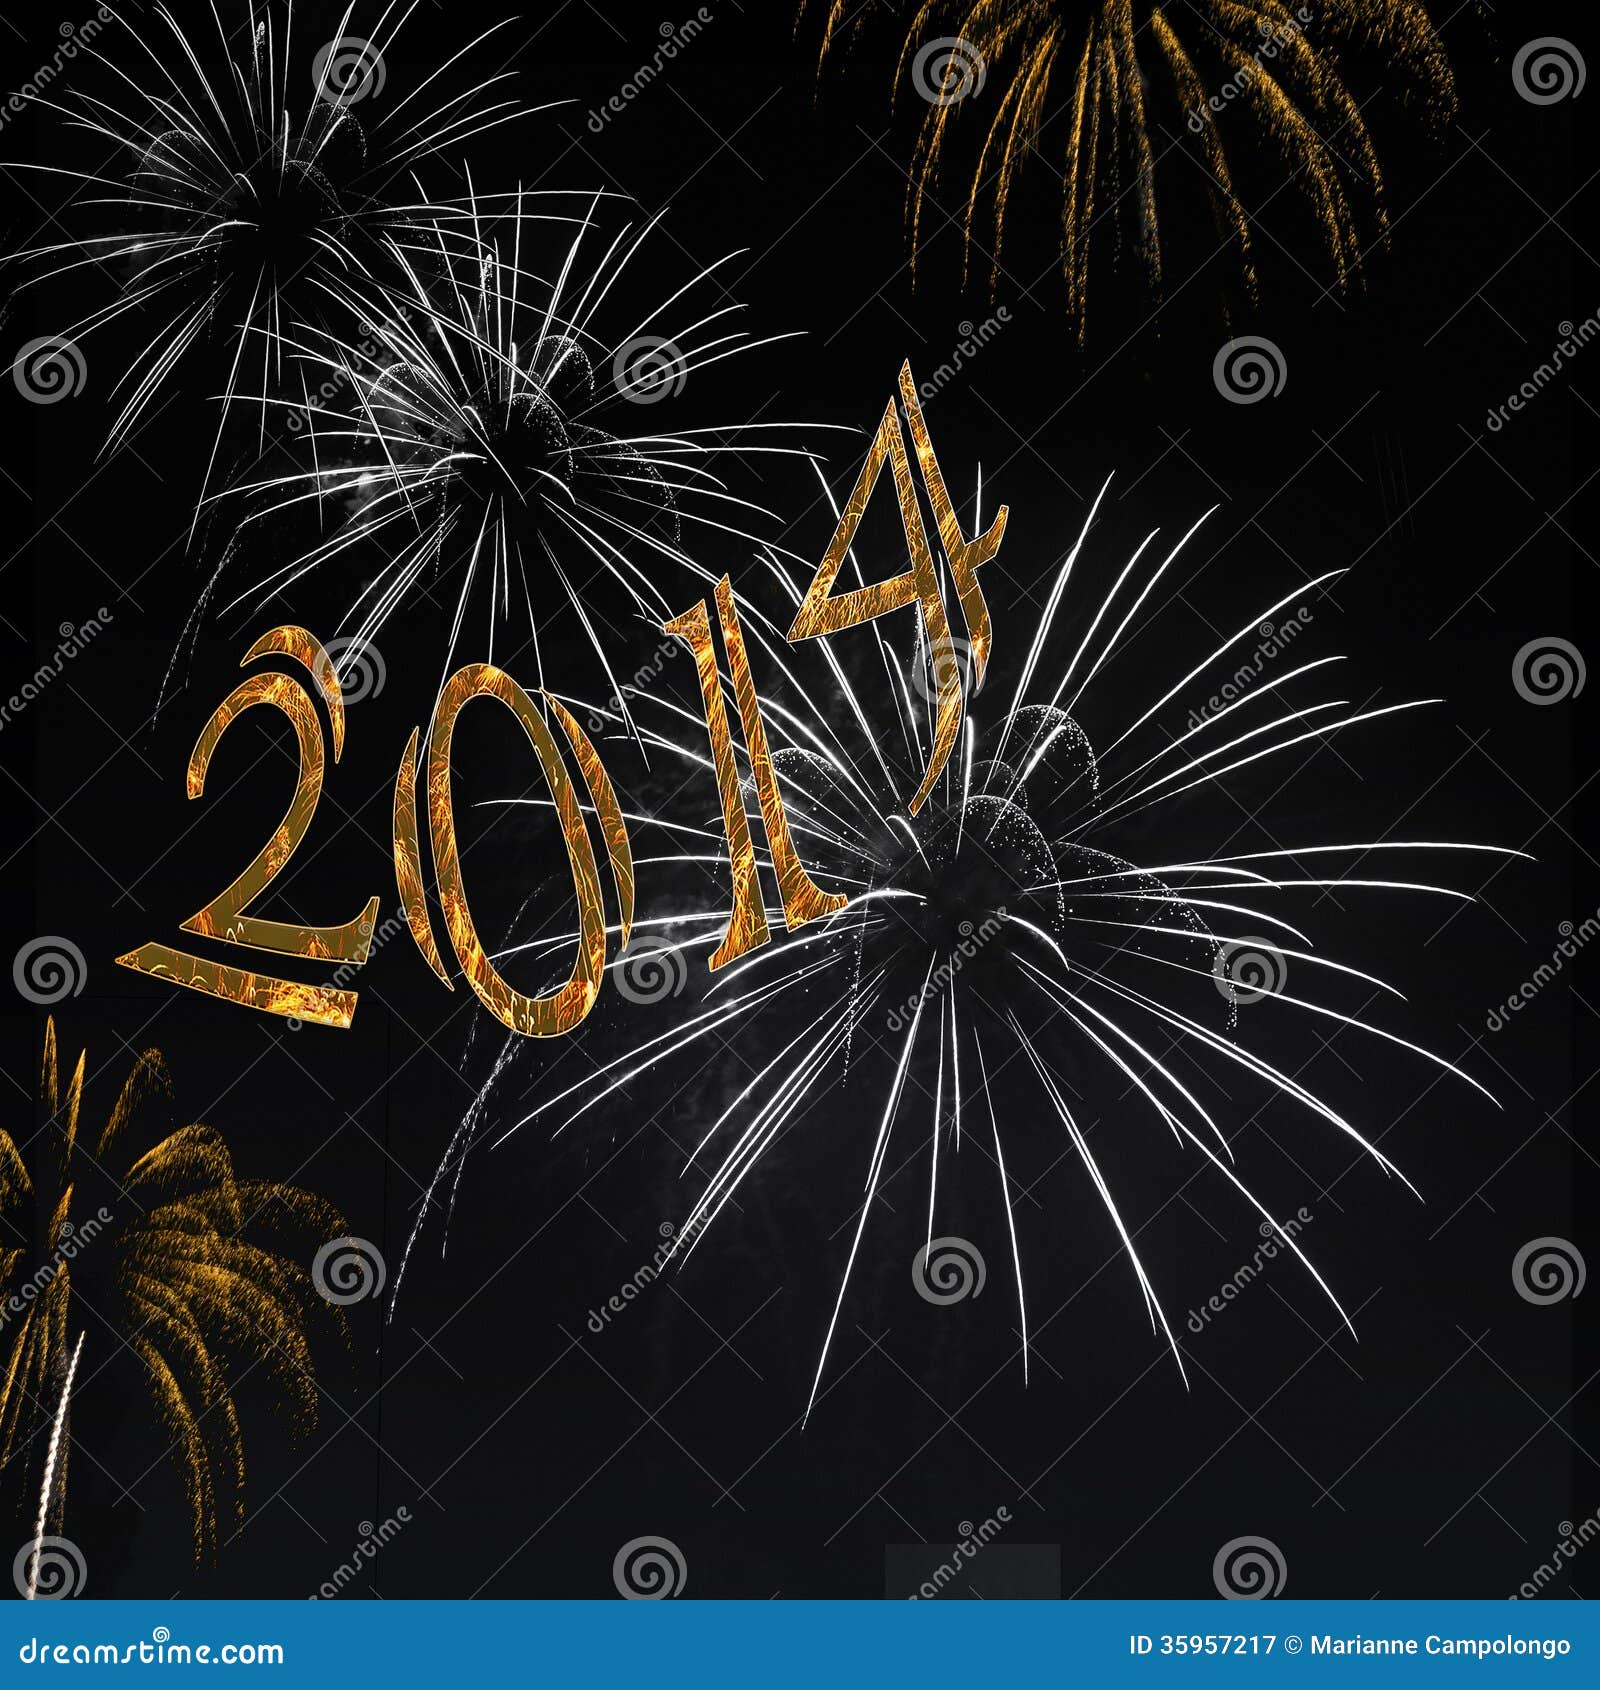 clipart new years eve 2014 - photo #37